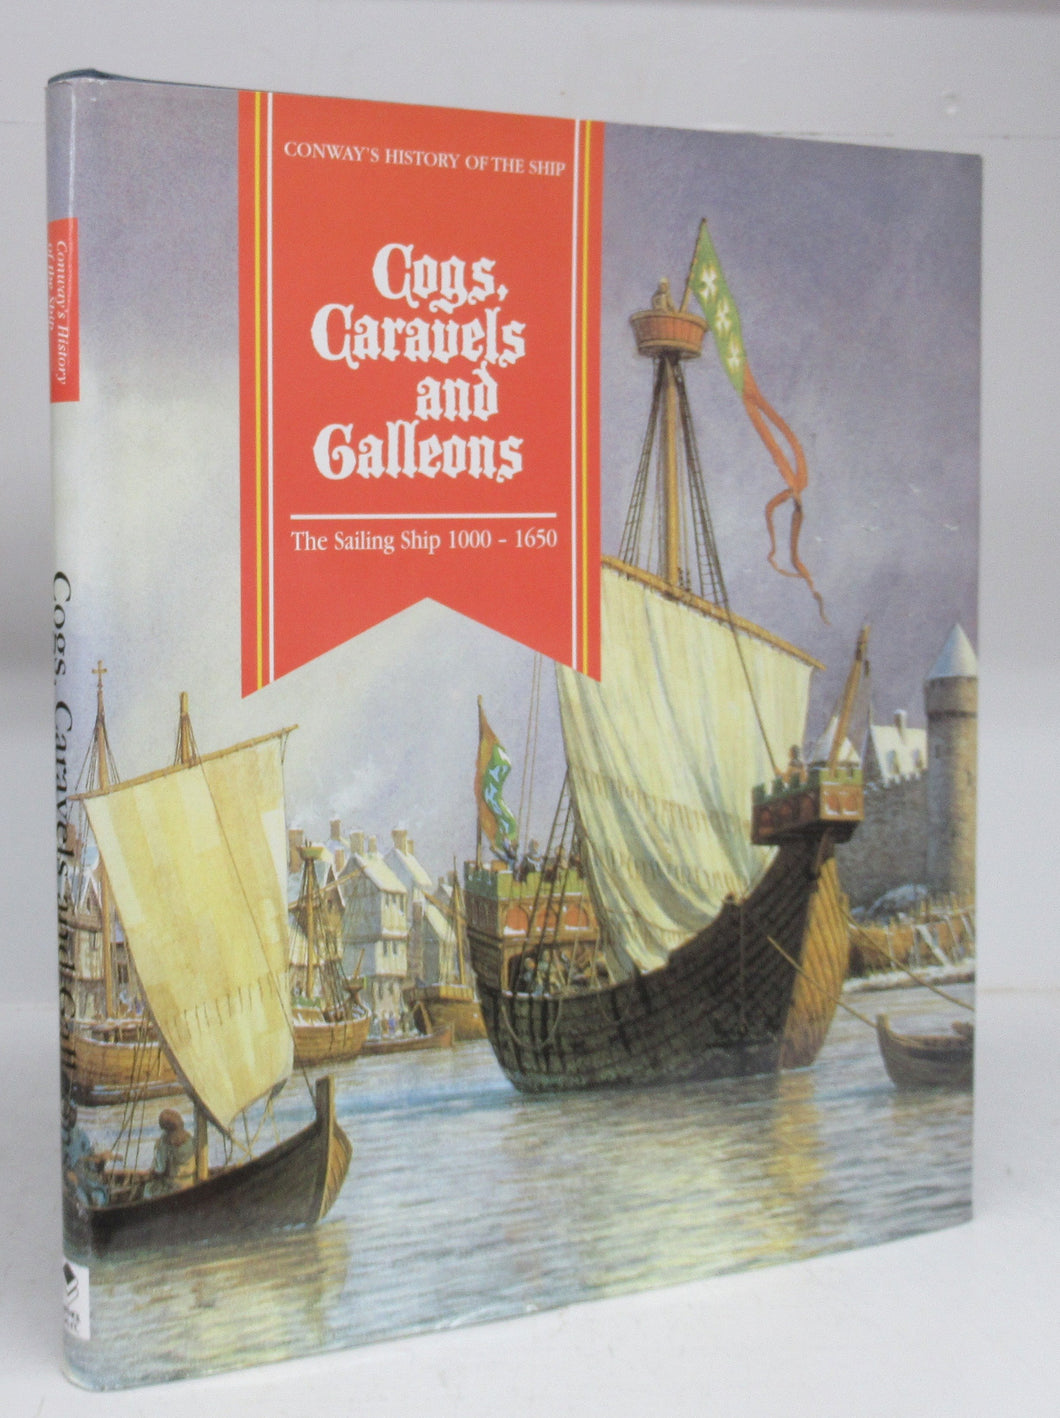 Cogs, Caravels and Galleons: The Sailing Ship 1000-1650